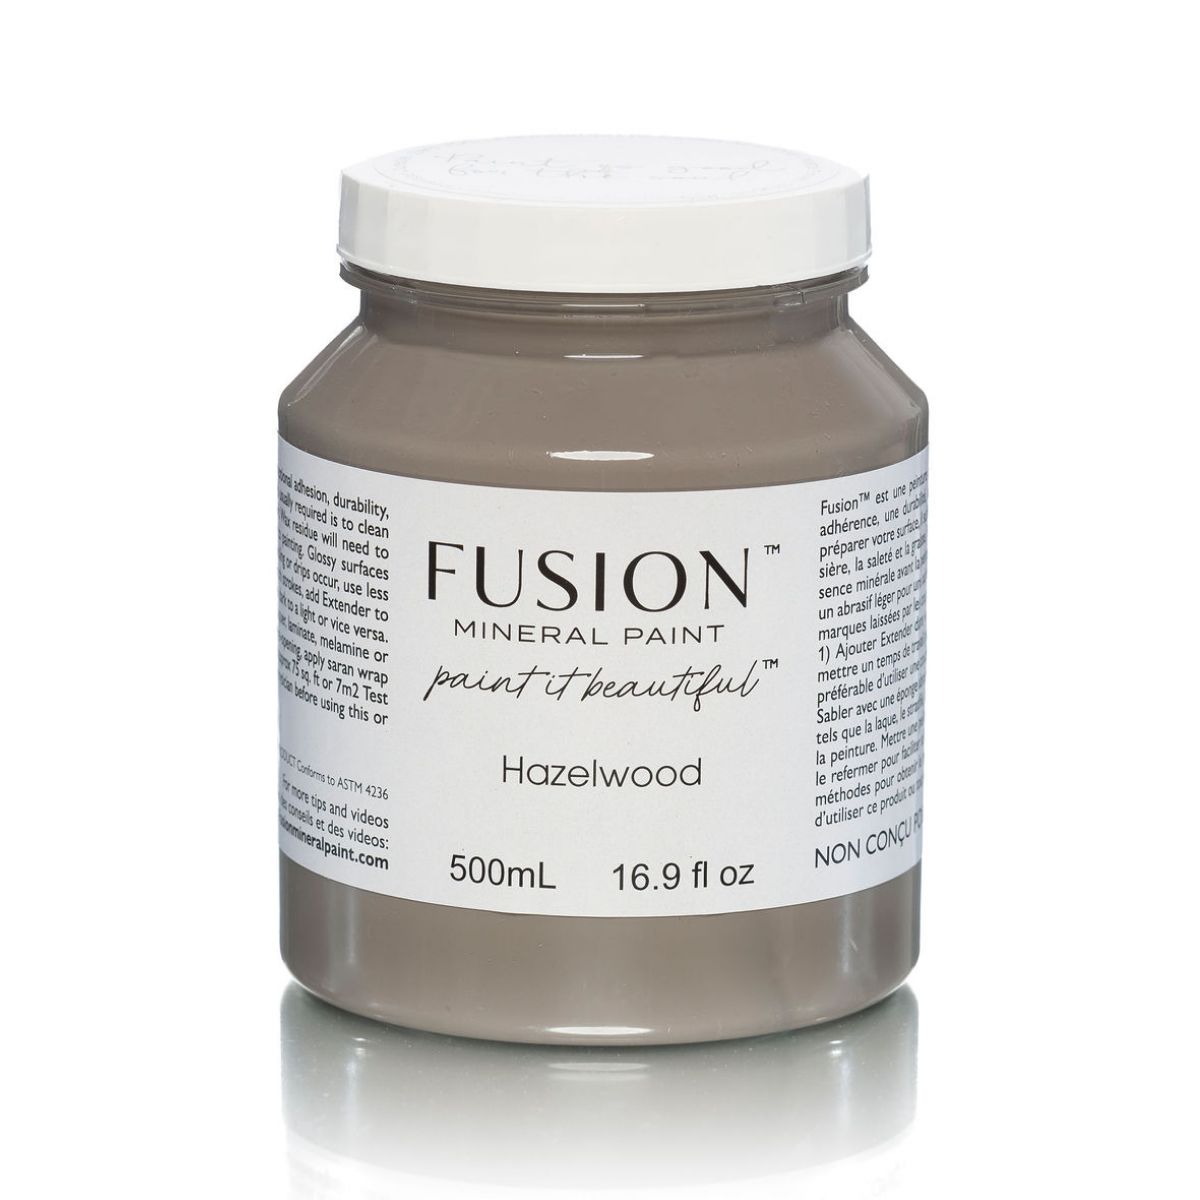 Hazelwood by Fusion